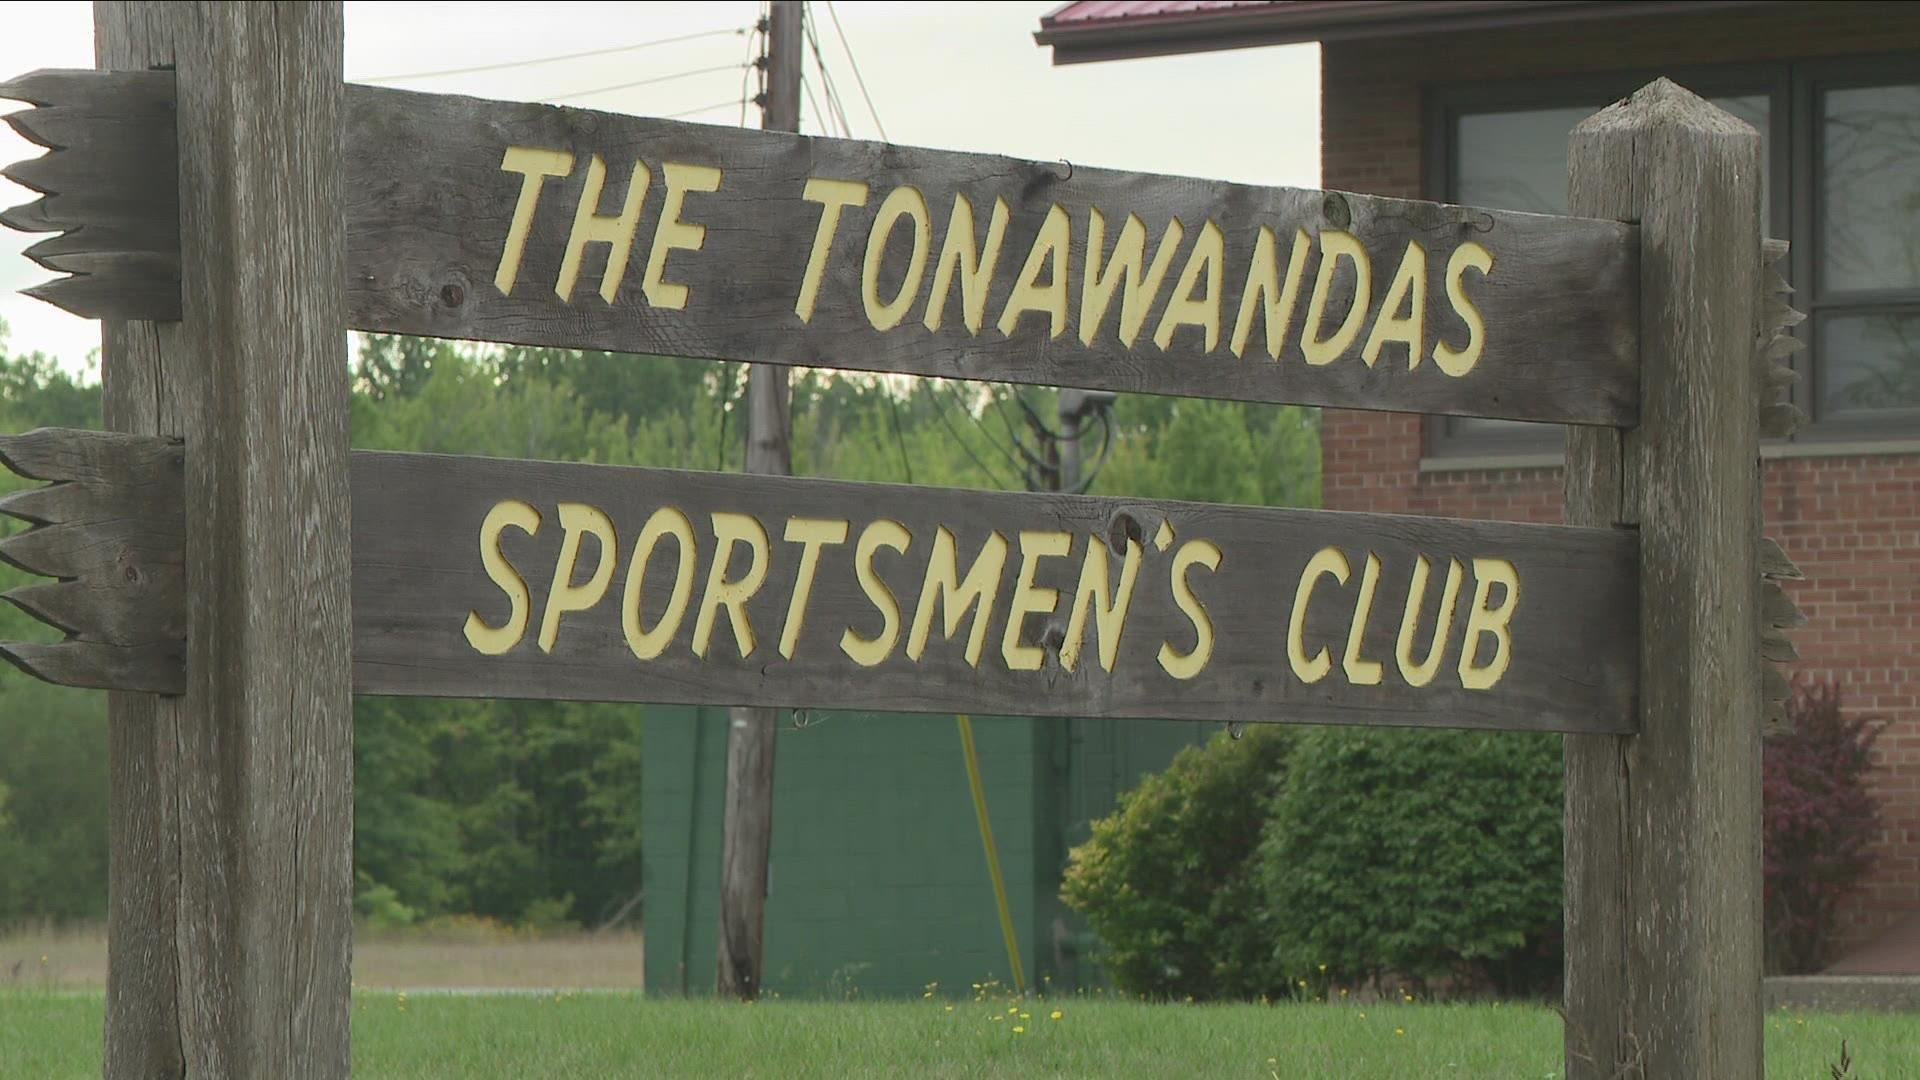 One local club president tells 2 On Your Side it's also weakening businesses that depend on the previous policies.